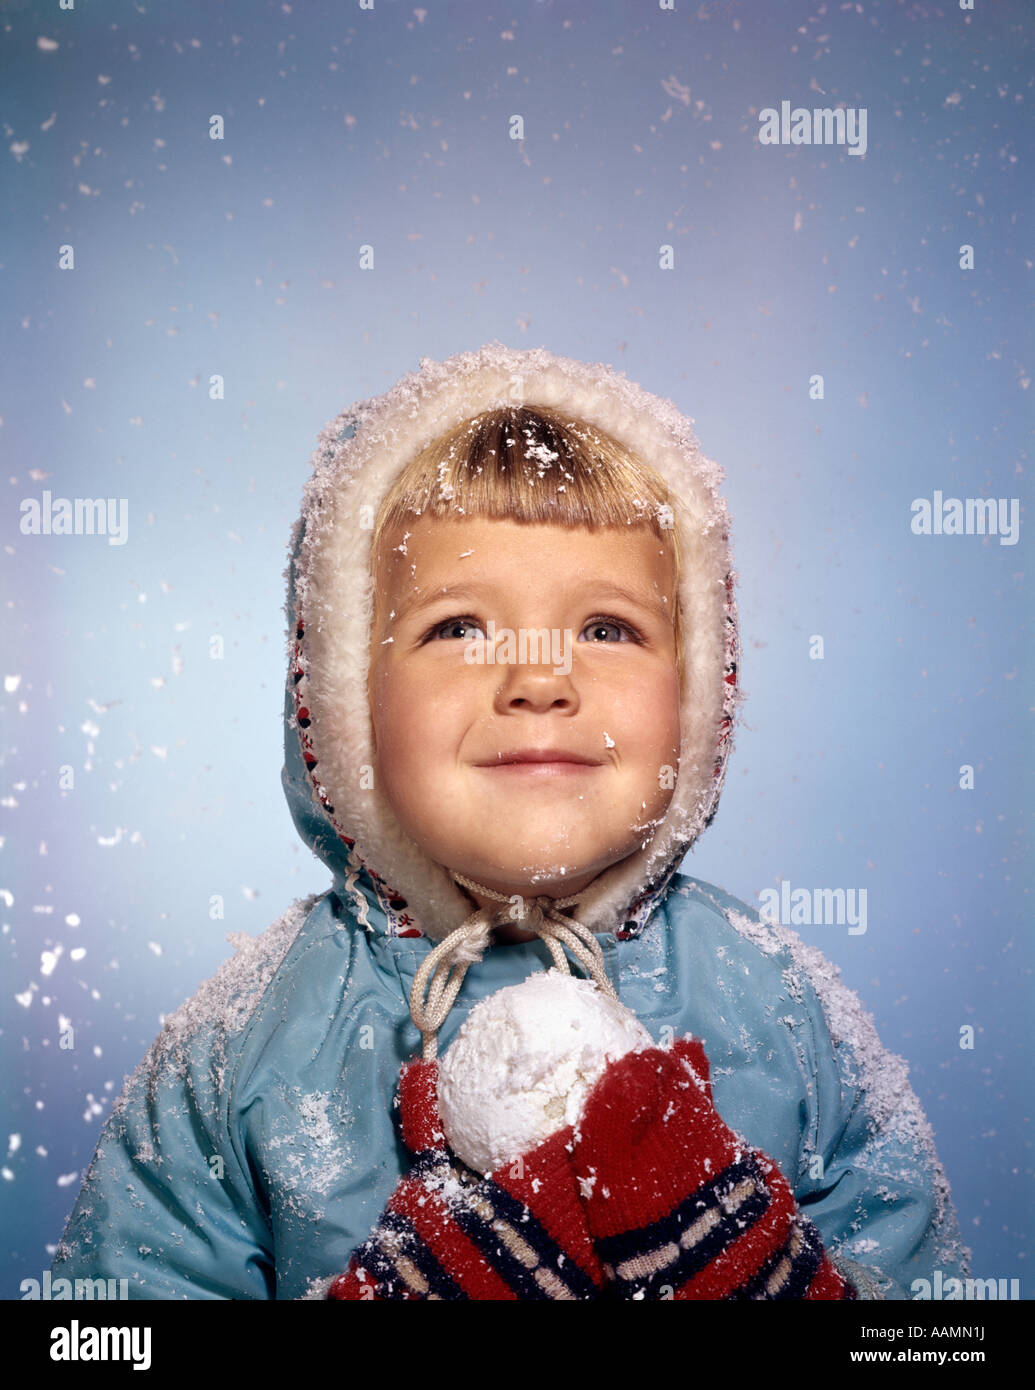 1960 LITTLE GIRL HOLDING SNOW BALL LOOKING UP AT SKY ROUGE SOURIANT BLANC MITAINES KNIT HAT VESTE BLEUE RETRO Banque D'Images